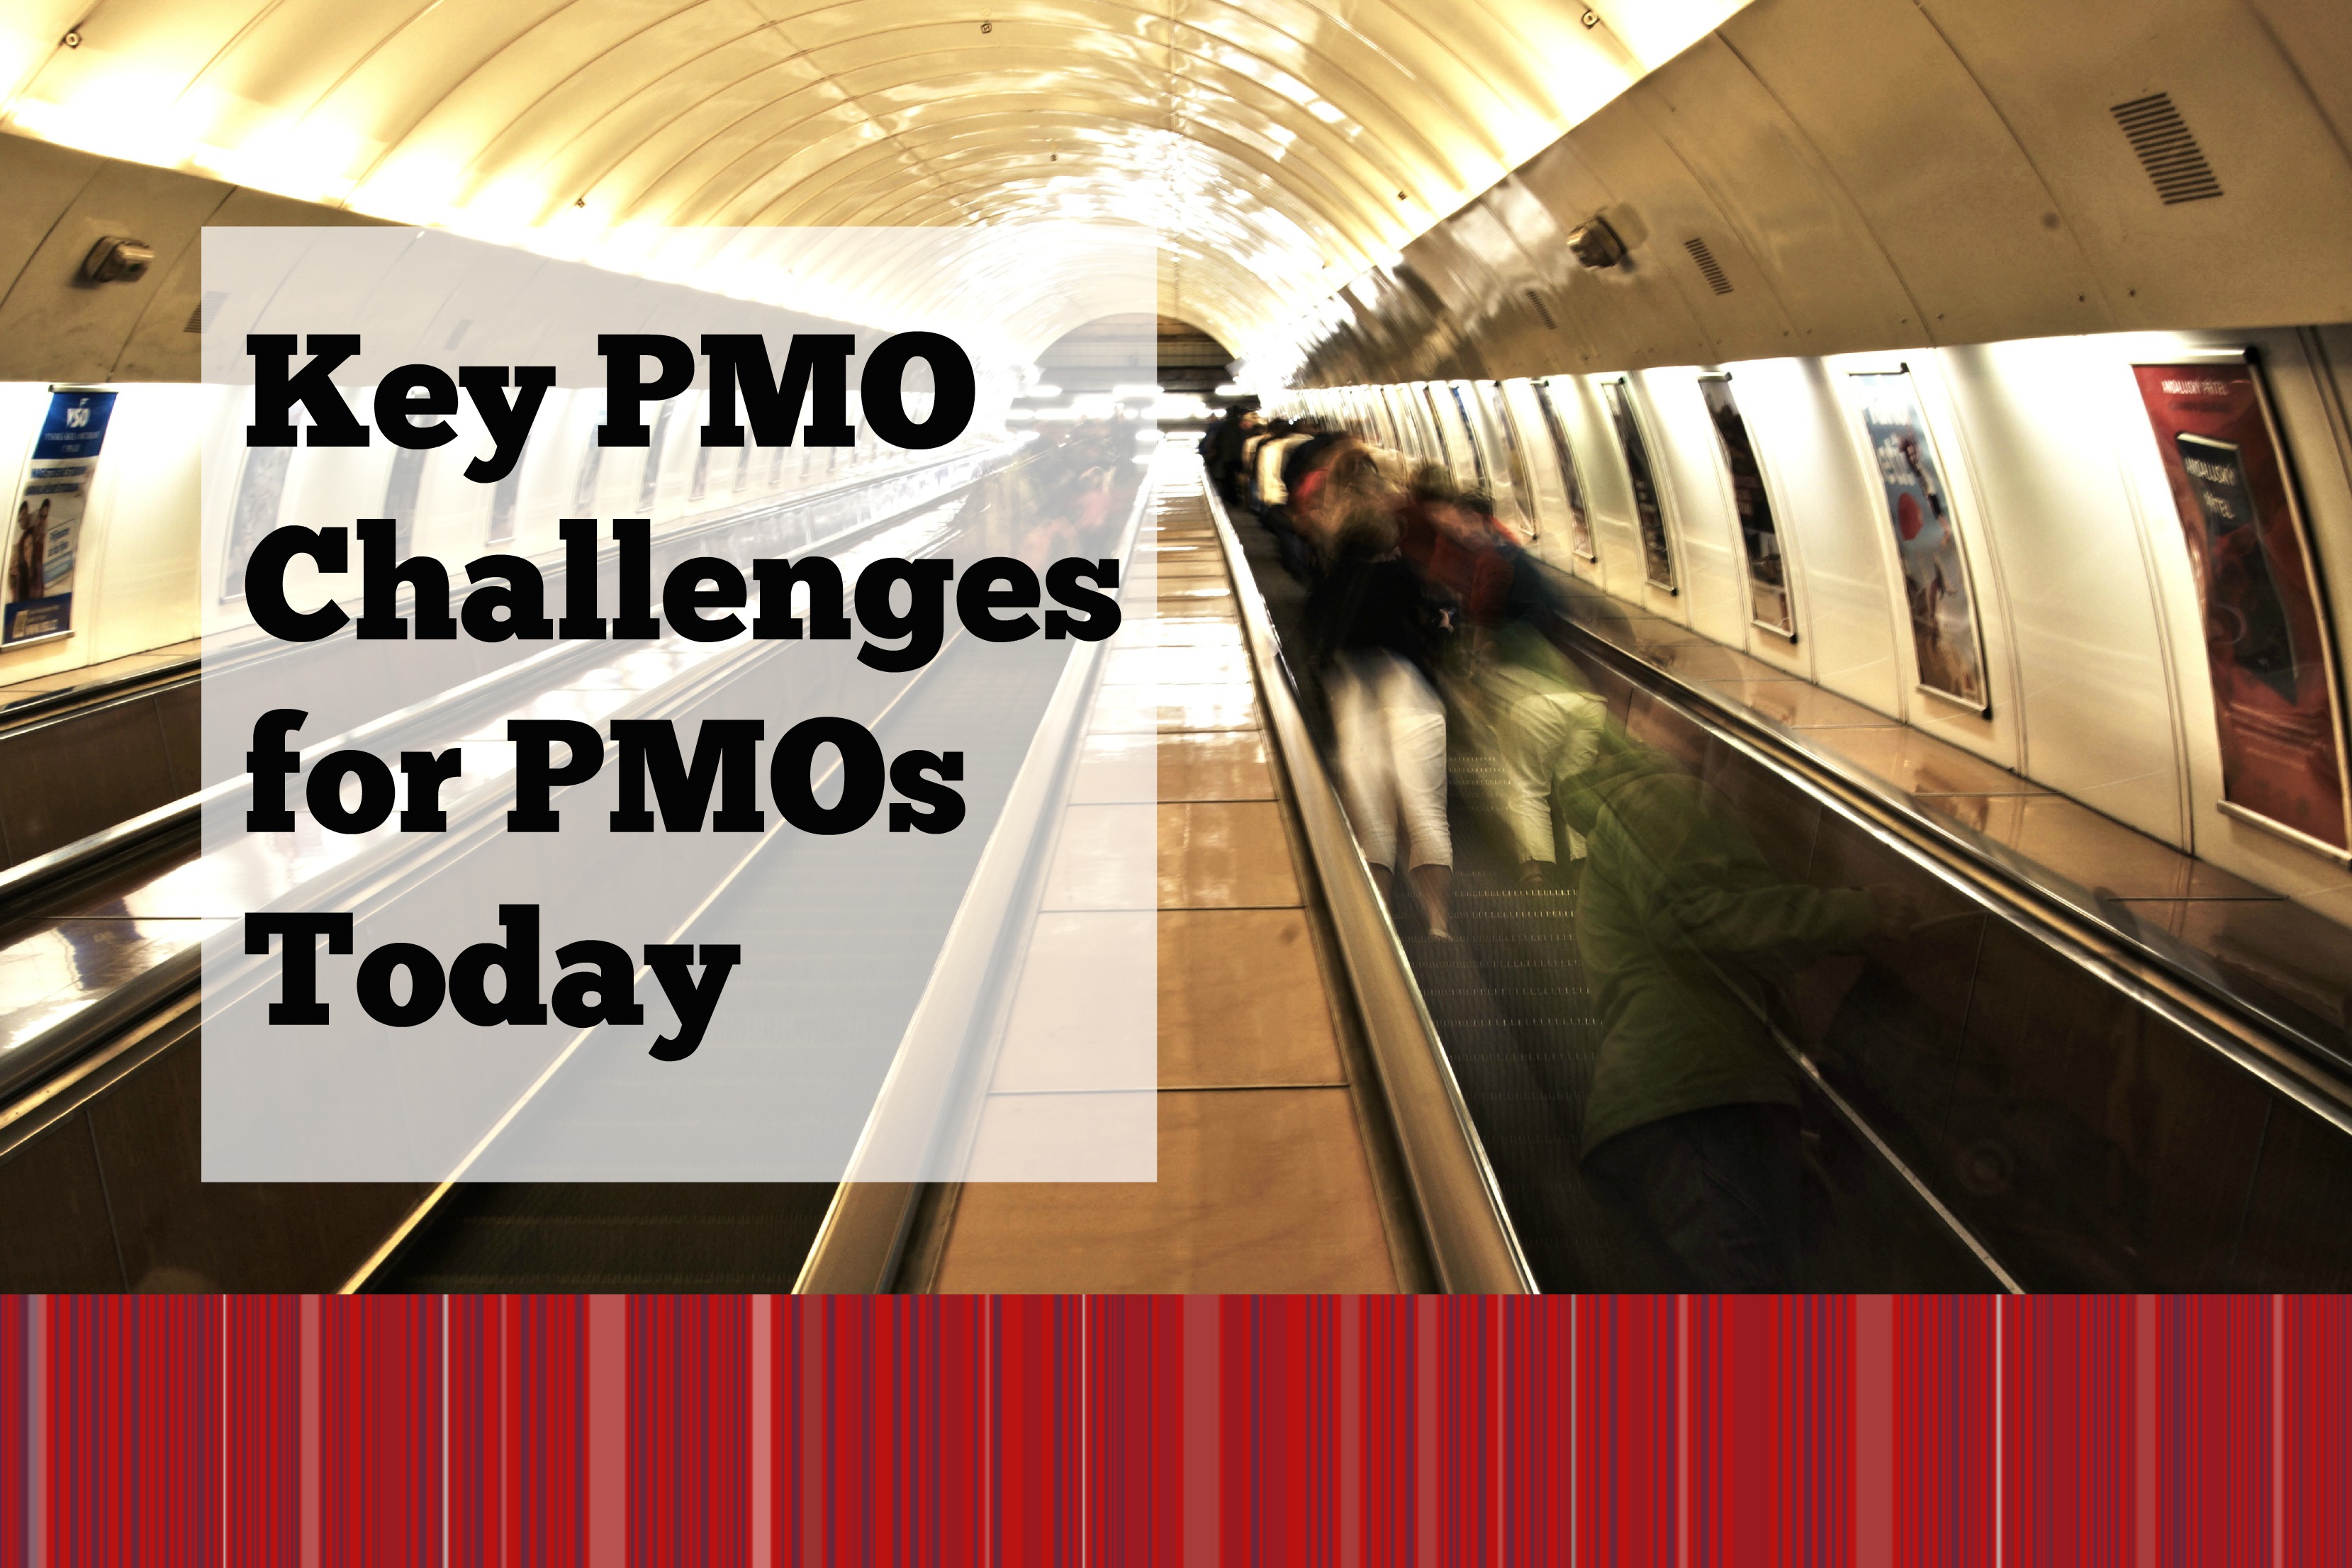 Key PMO Challenges for PMOs Today